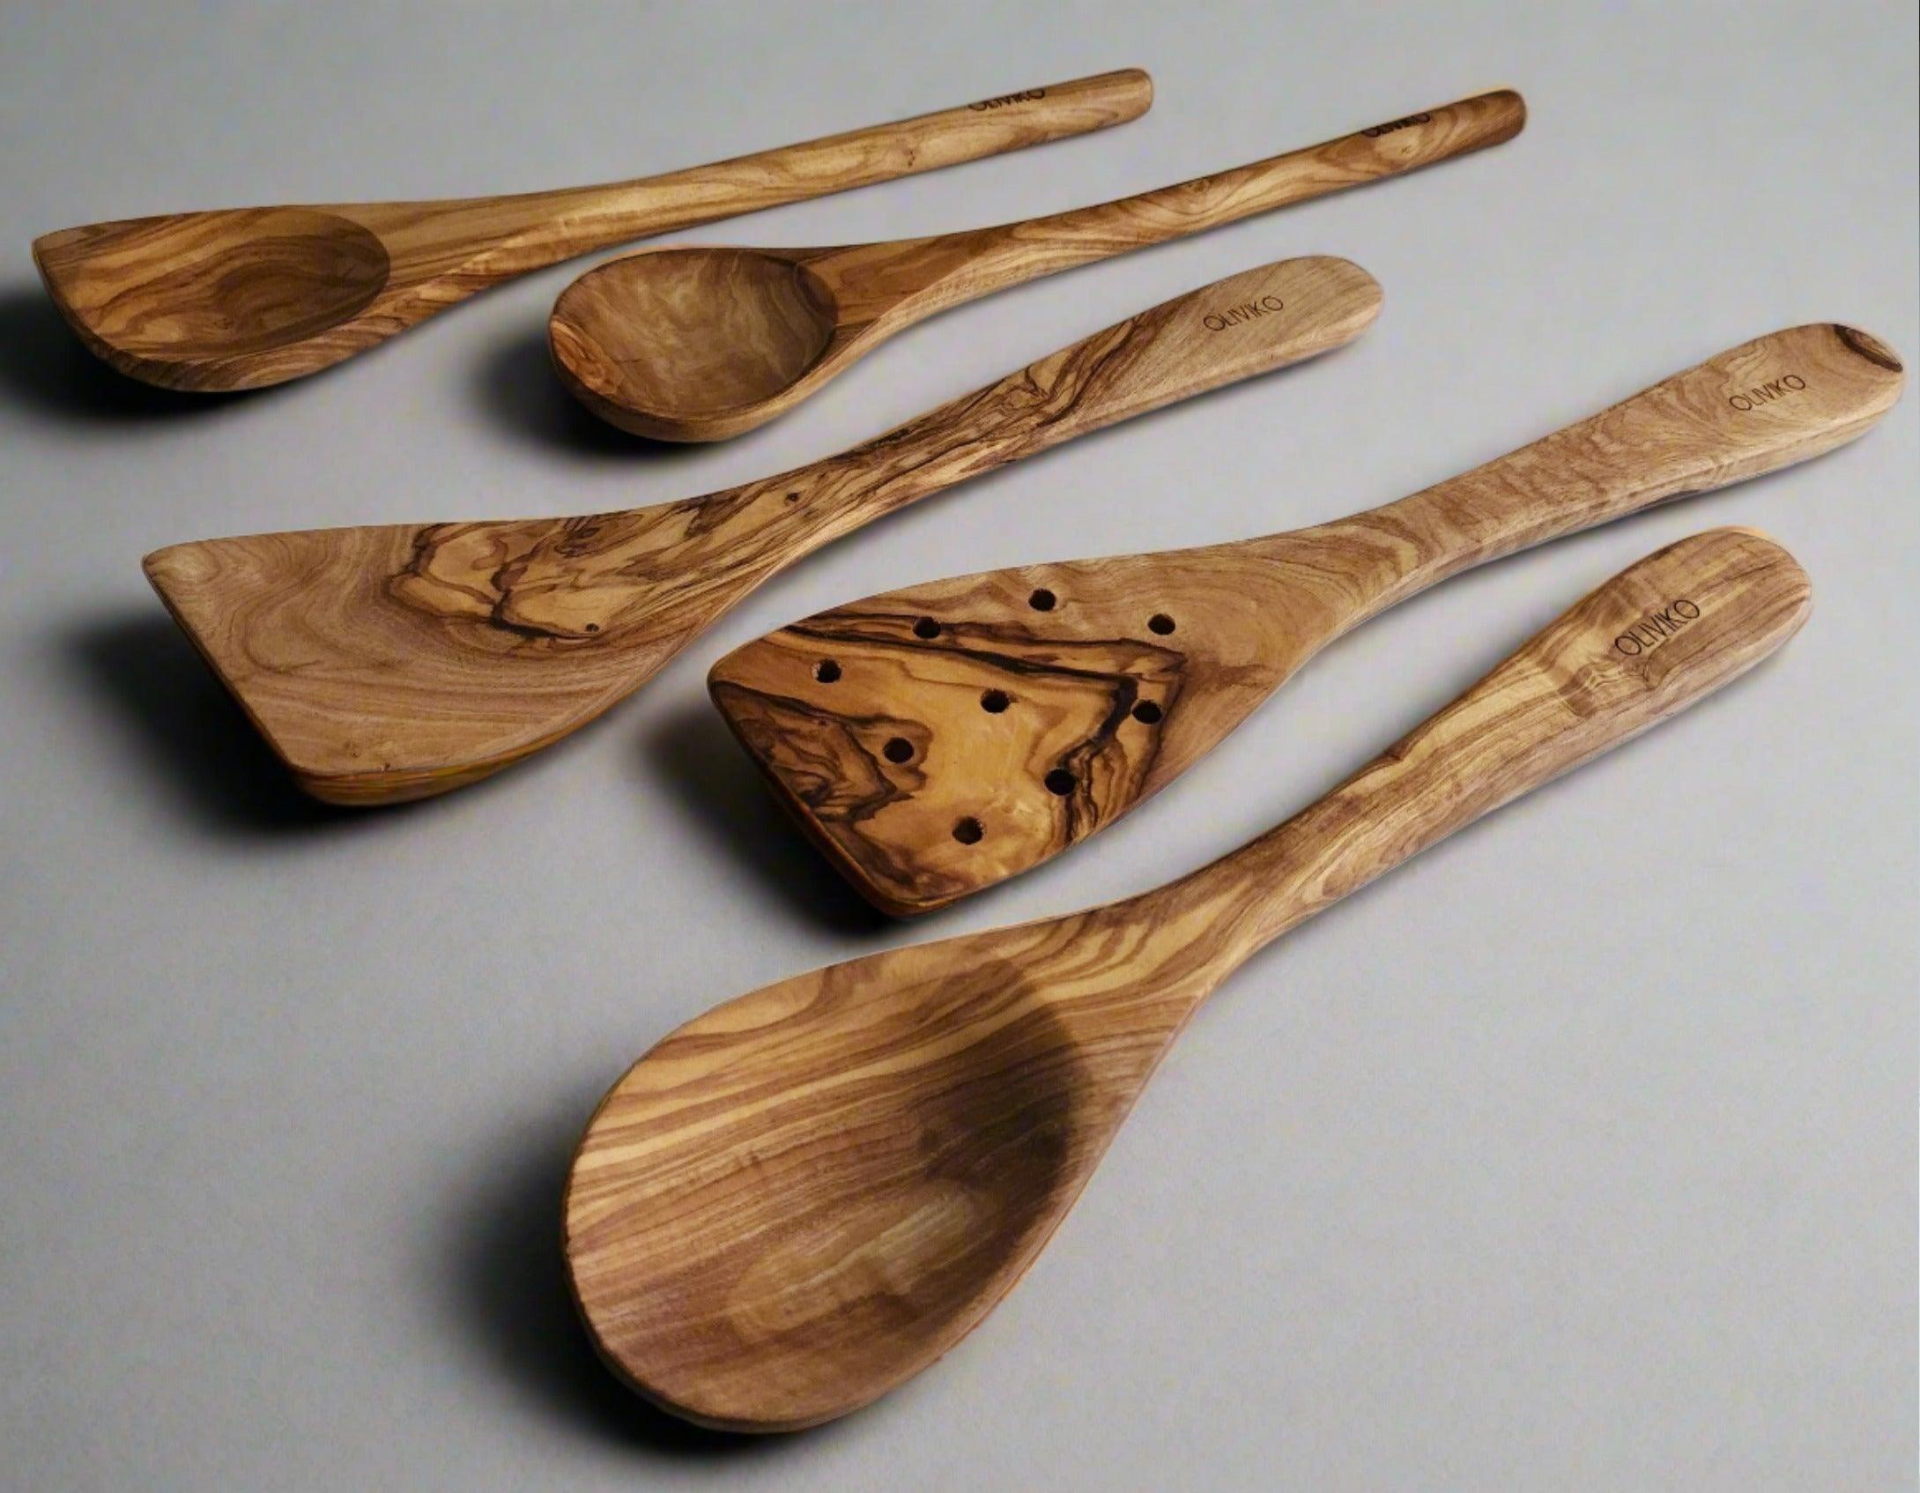 Handcrafted Olive Wood Utensil Set with Holder - 2 Spatulas & 3 Spoons, Goodies N Stuff